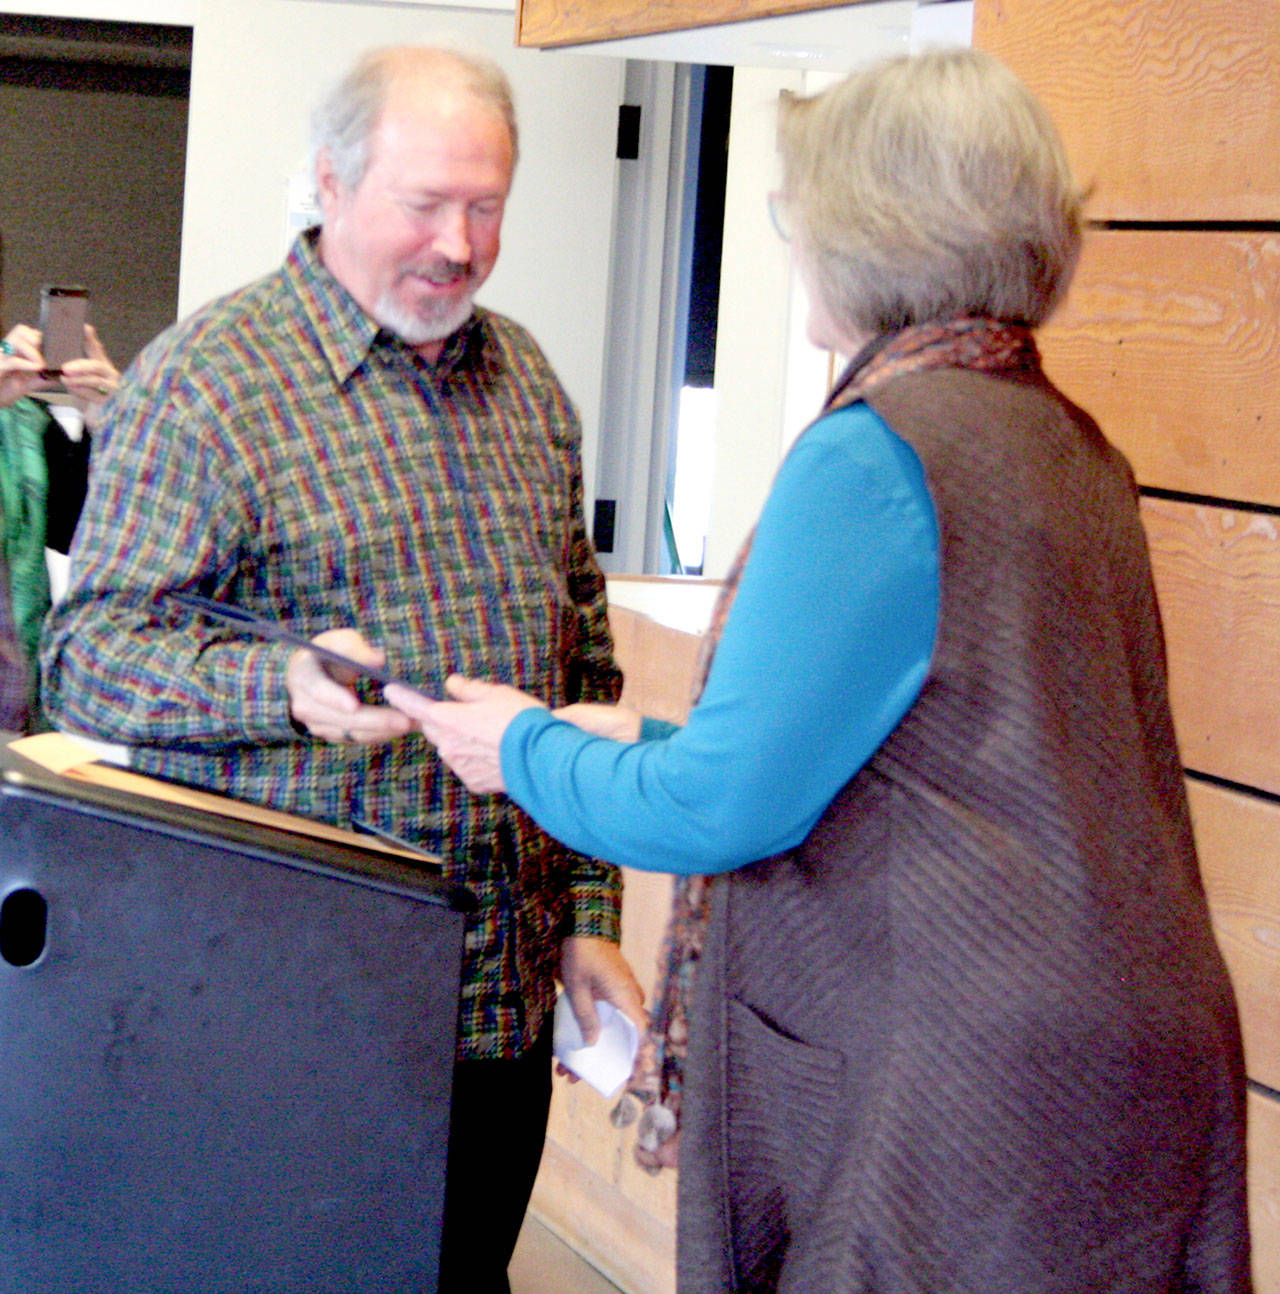 Stephen Yates, left, accepts a city proclamation declaring him the Arts Commission’s Angel of the Arts from Mayor Deborah Stinson during a ceremony Friday at the Cotton Building downtown Port Townsend. (Brian McLean/Peninsula Daily News)